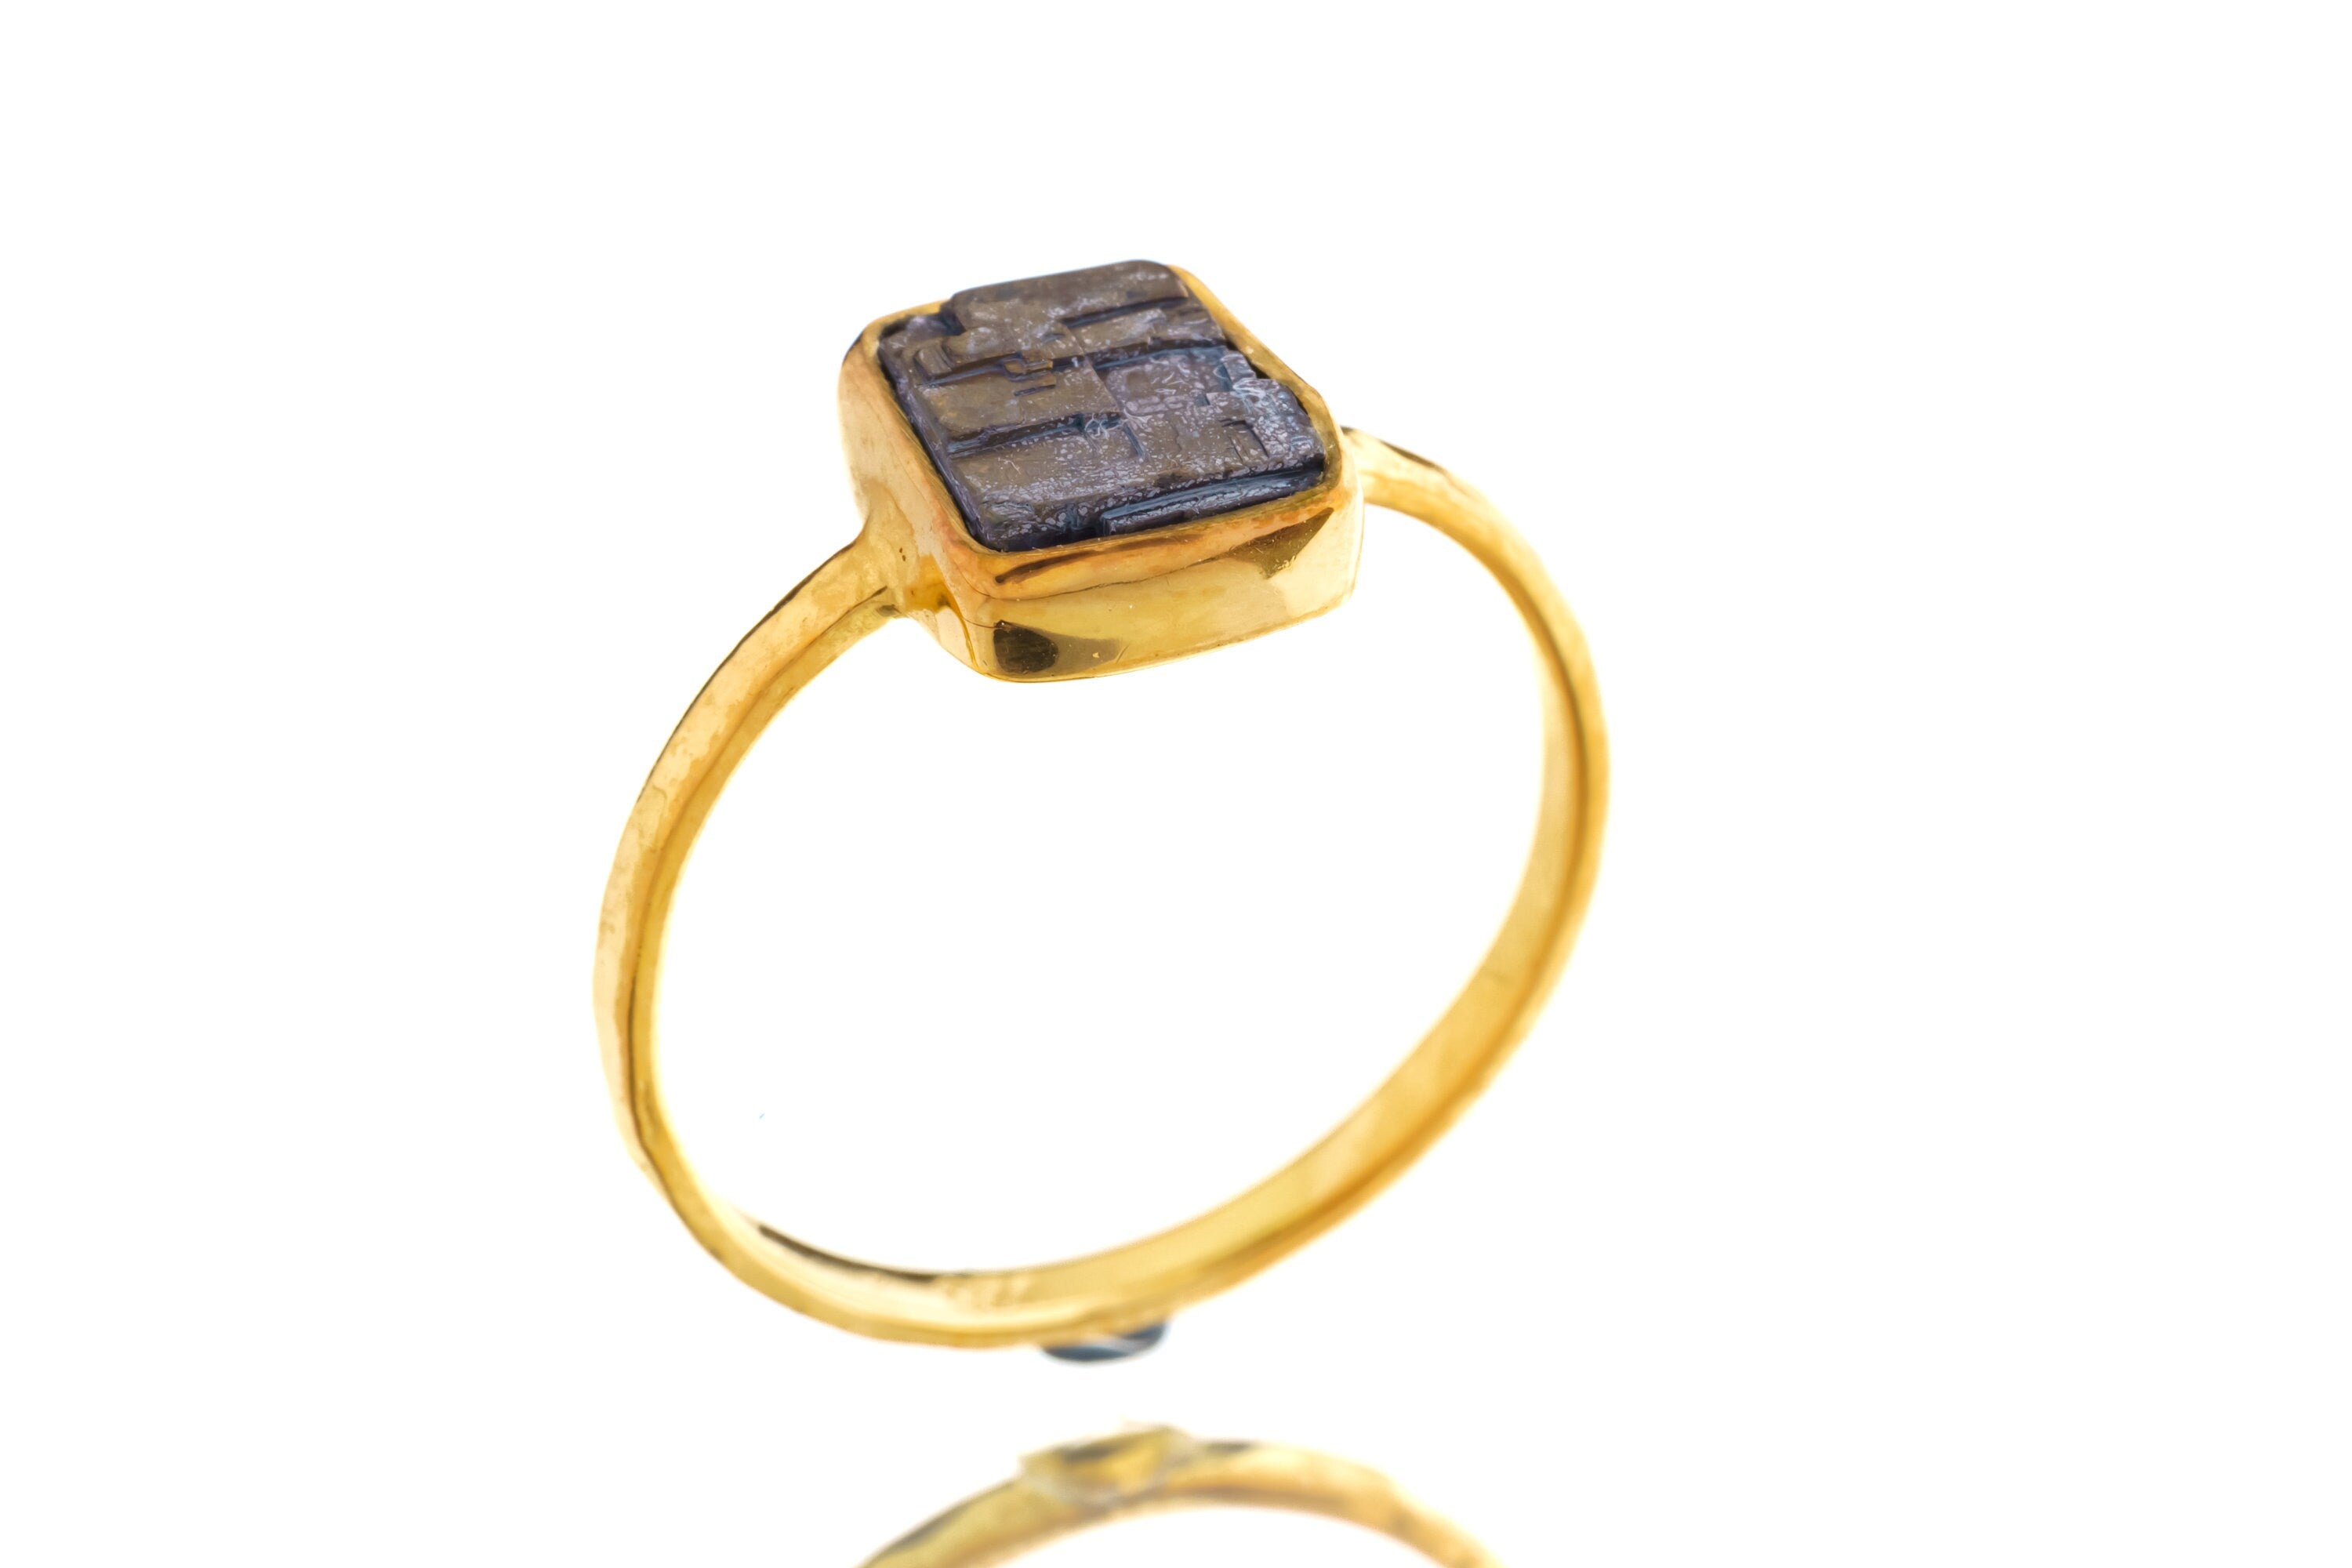 Gold Kissed Australian Cubic Pyrite - Stack Crystal Ring - Size 6 US - Gold Plated 925 Sterling Silver - Thin Band Hammer Textured